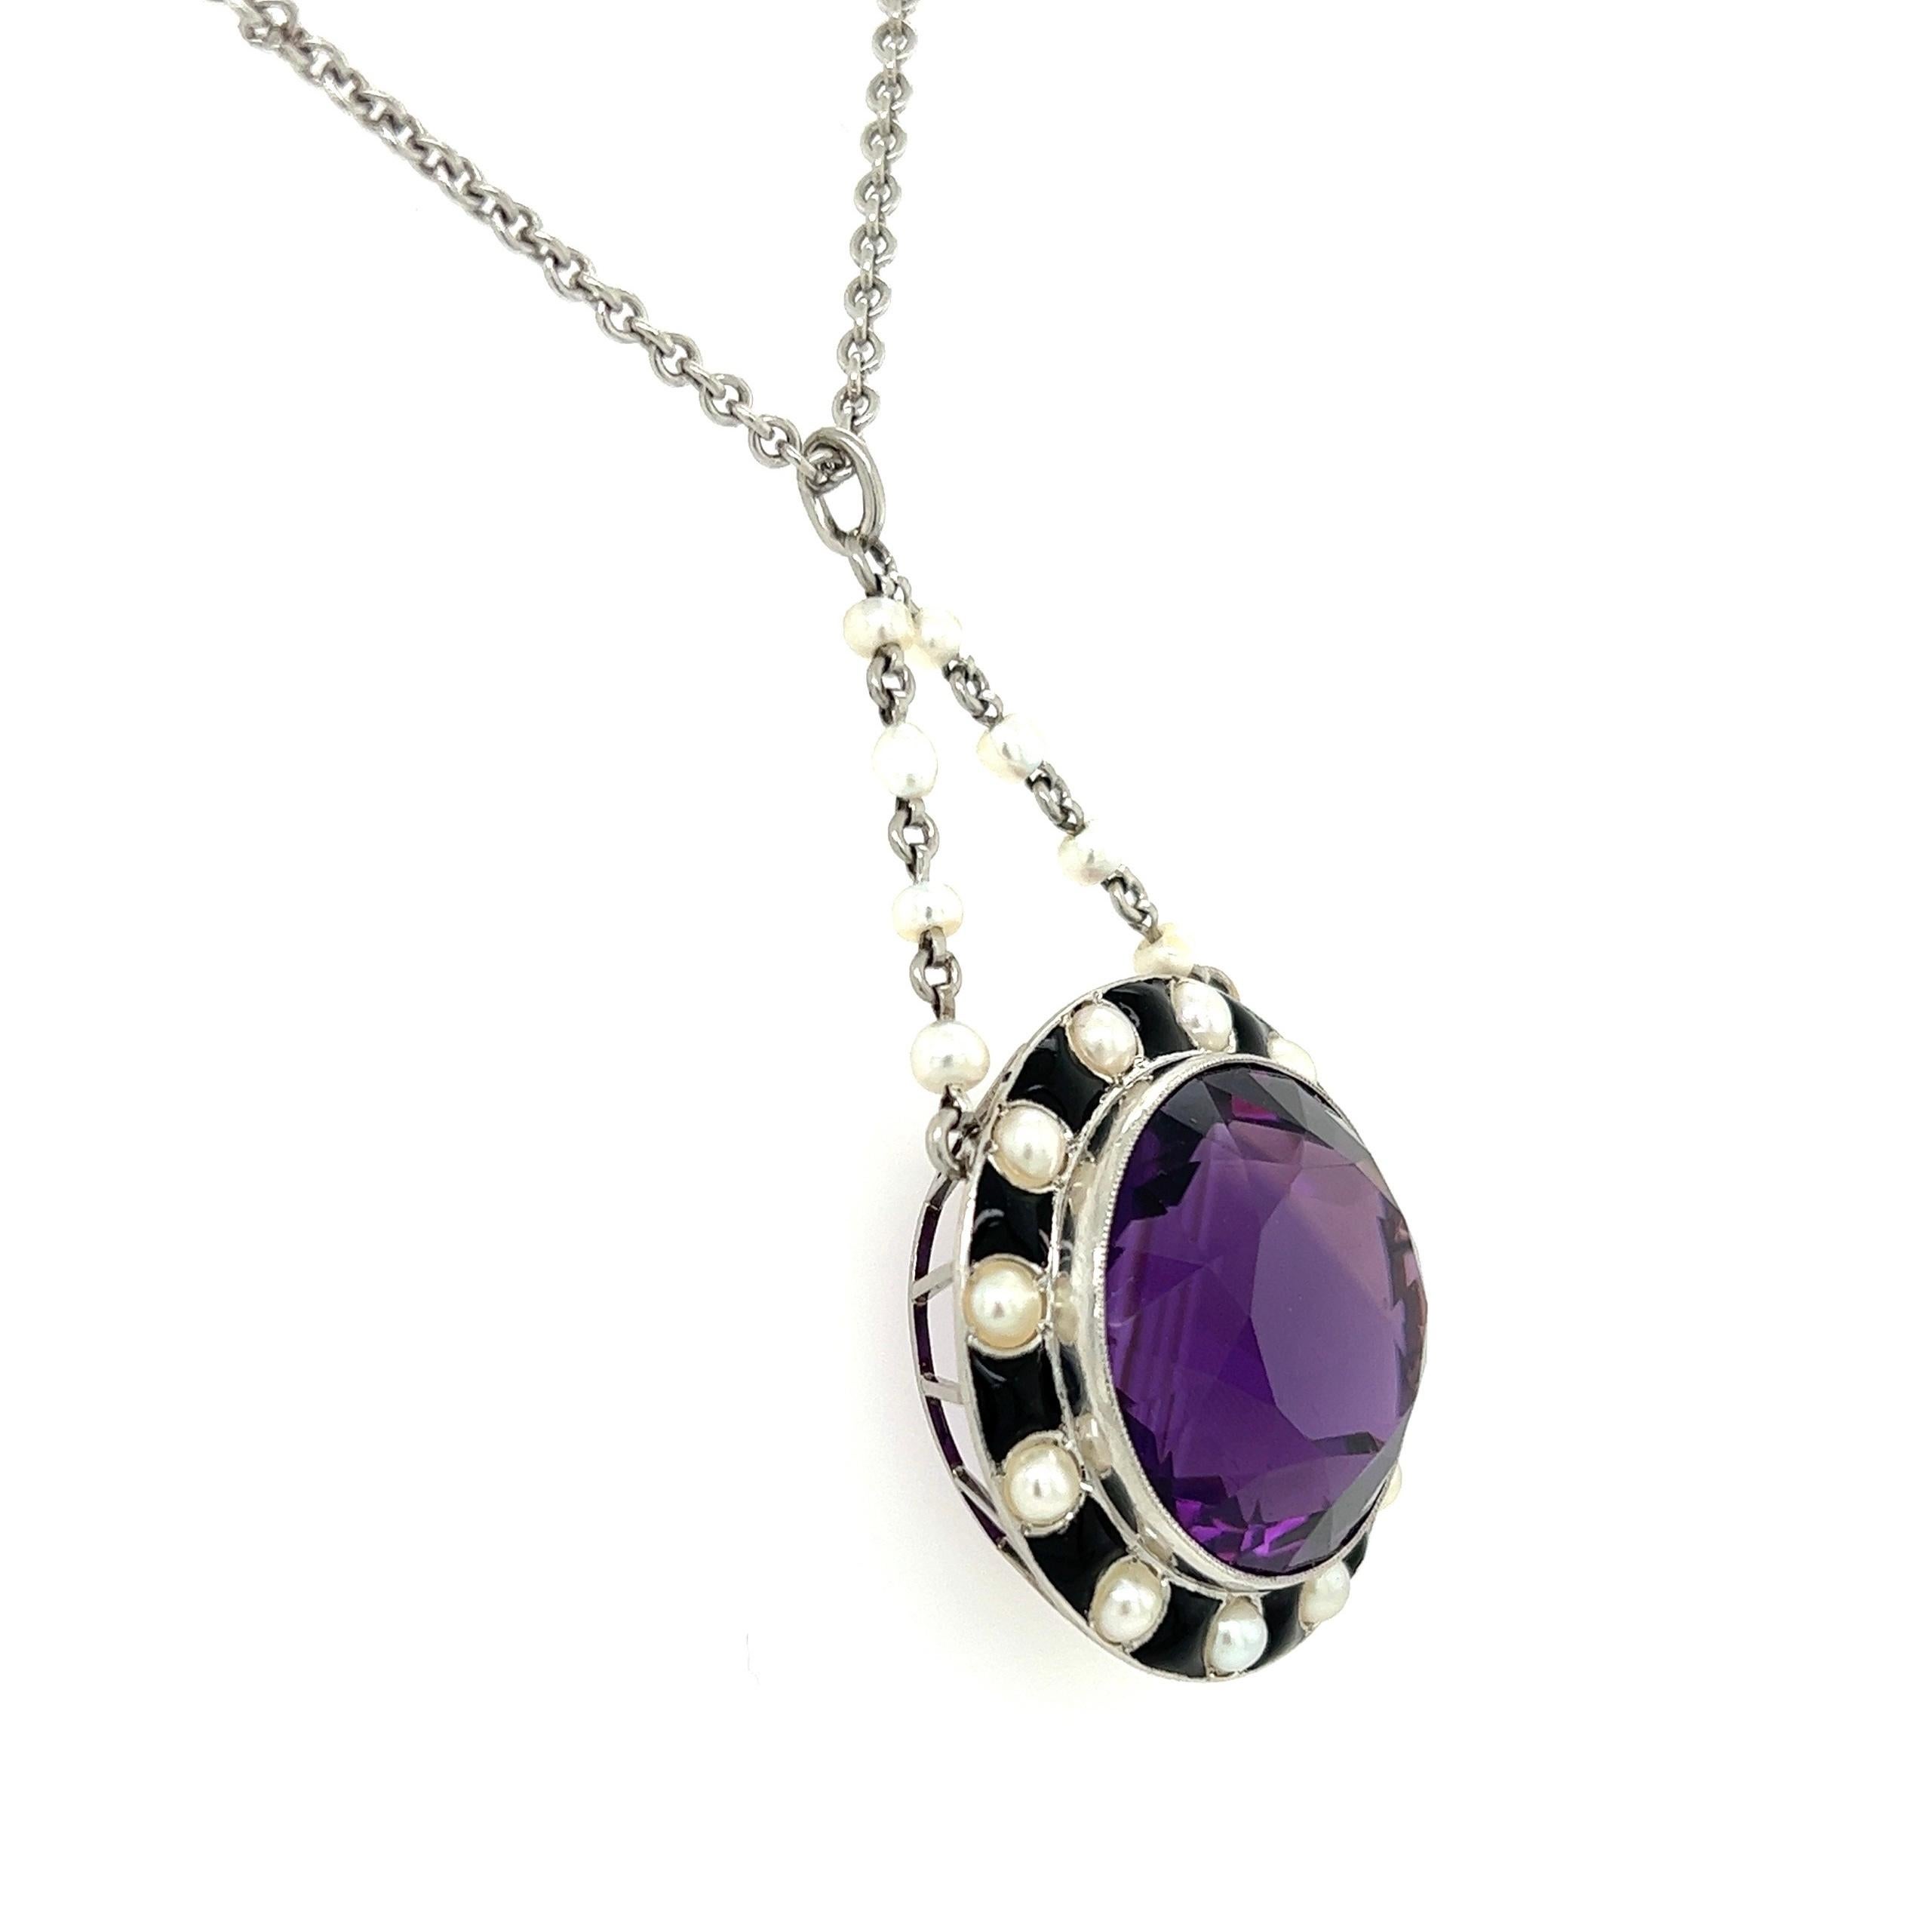 Simply Beautiful! Mid-Century Modern Amethyst Onyx and Pearl Hand crafted Gold Drop Necklace. Centering a 30 Carat Round Amethyst, surrounded by Onyx and Pearls. Approx. dimensions of Pendant: 2.06” l x 1.13” w x 0.55” h. Suspended from 18k white